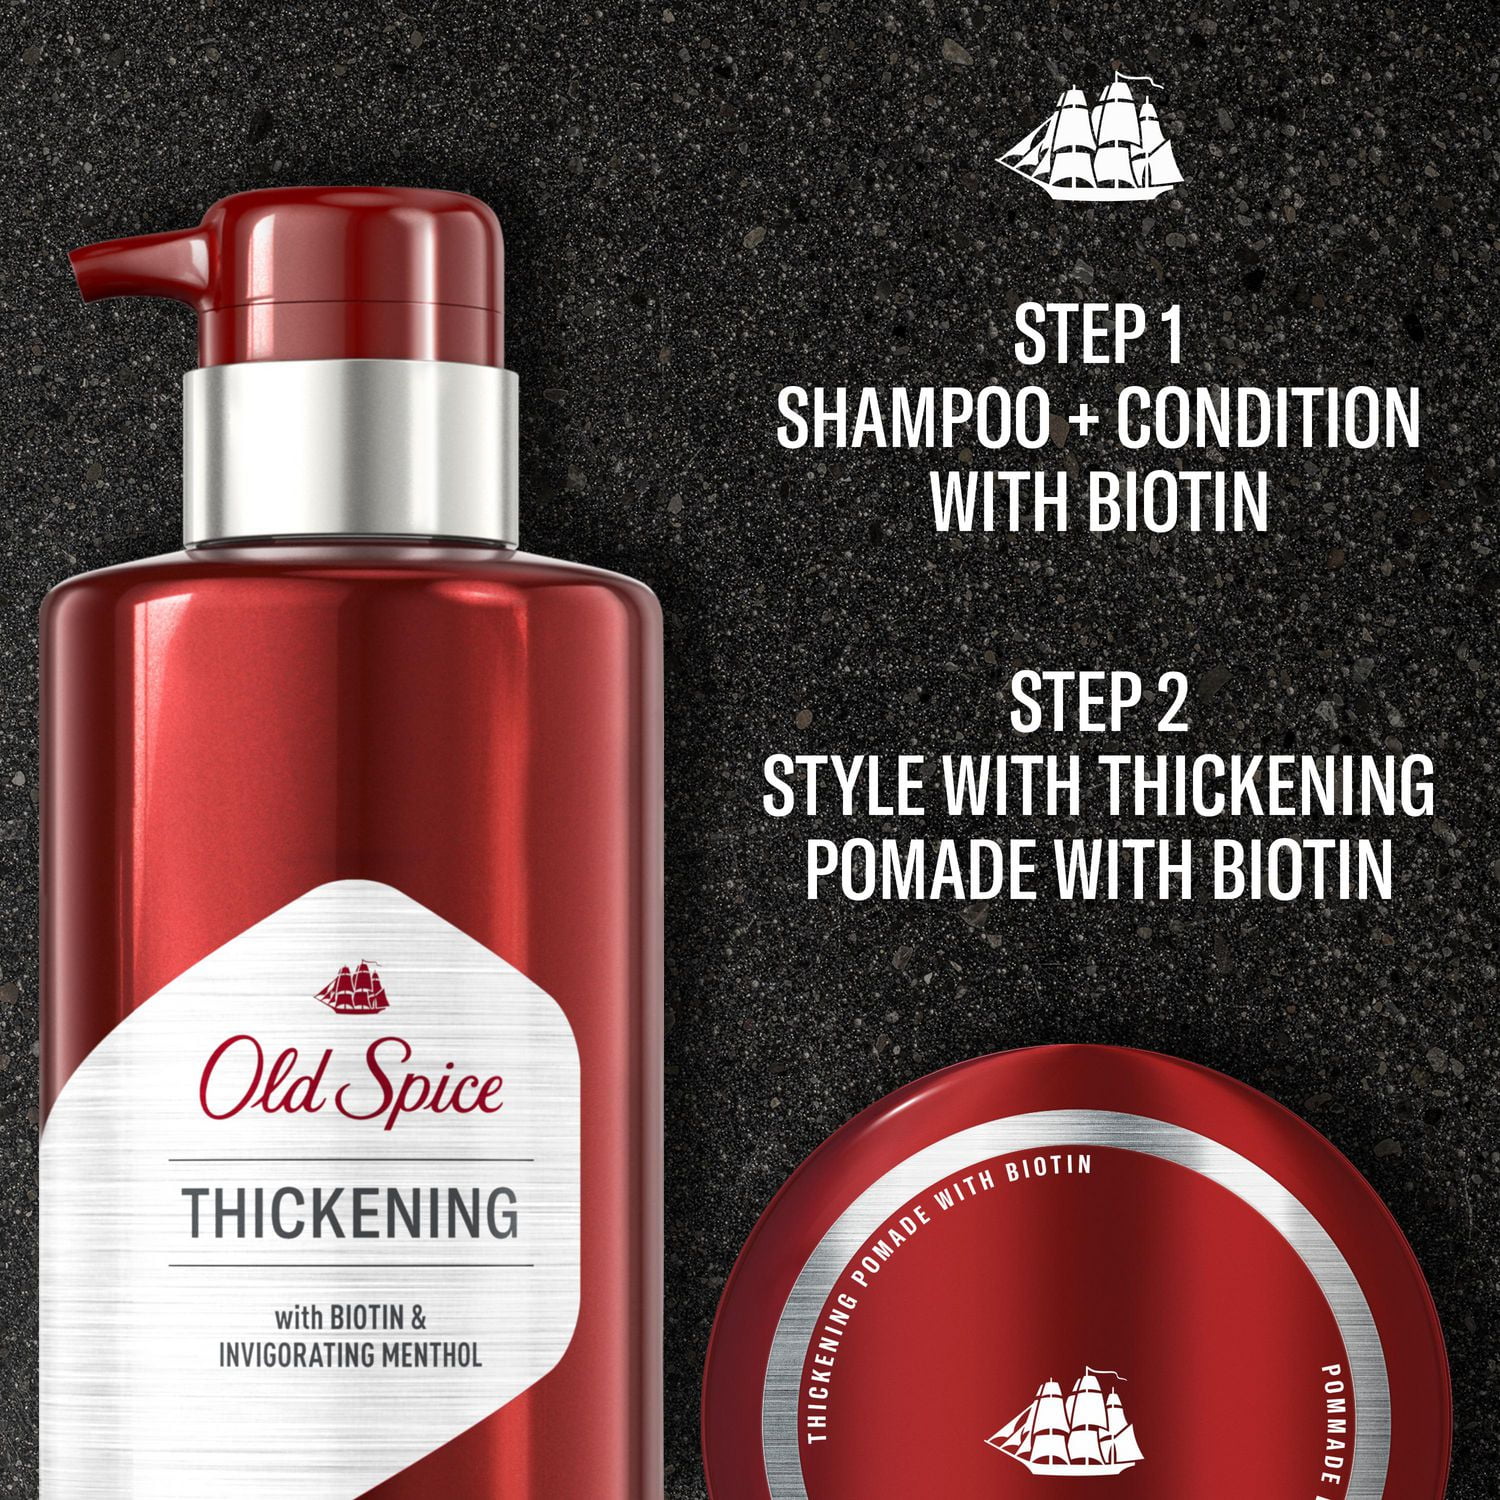 Cremo Hair Gel Thickening for Fine Thinning Hair 6 oz Medium Hold Amazing  Scent